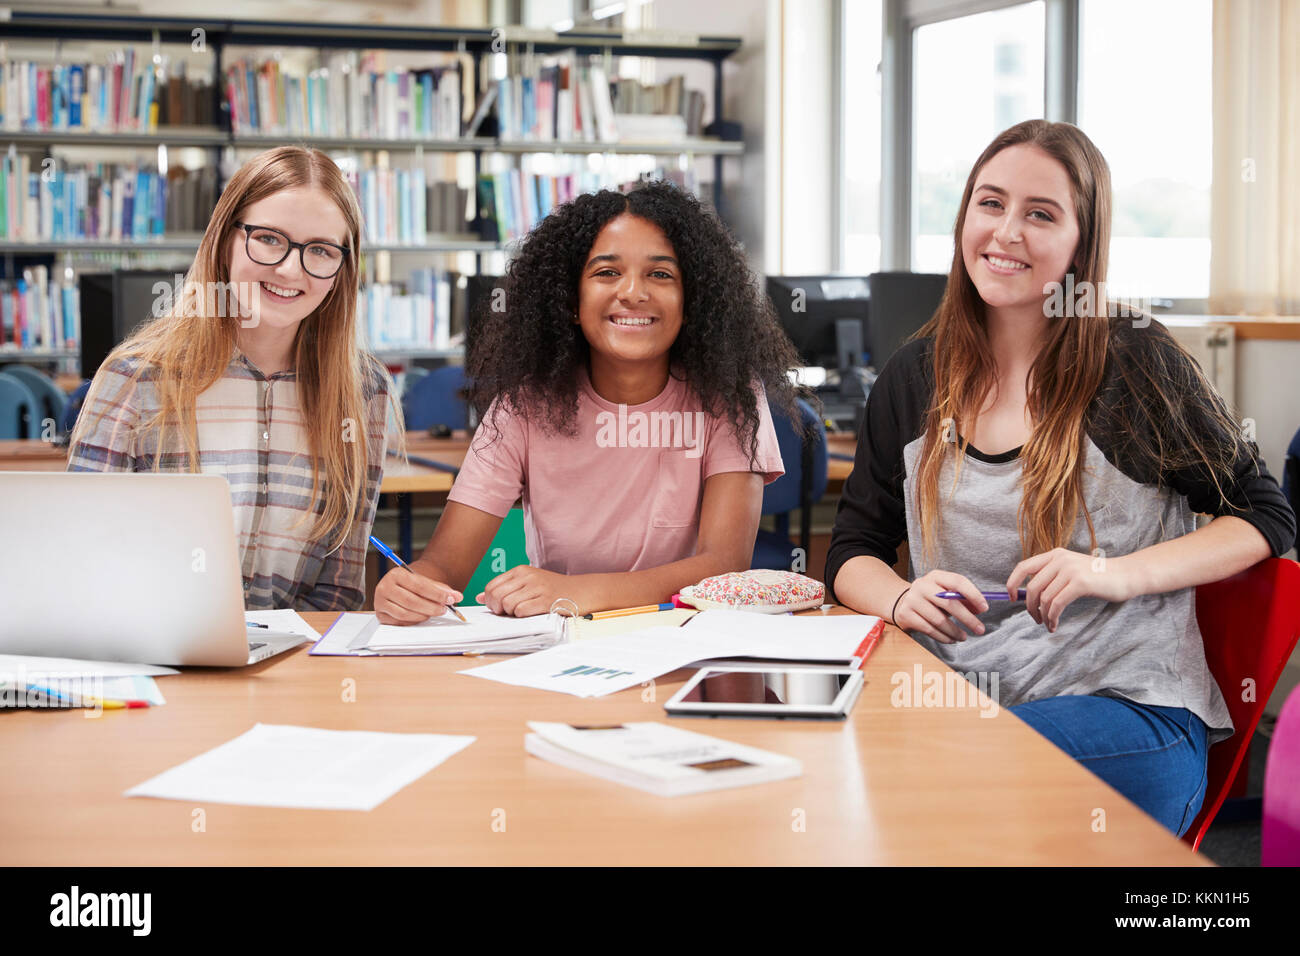 Portrait Of Female College Students Working In Library Together Stock Photo